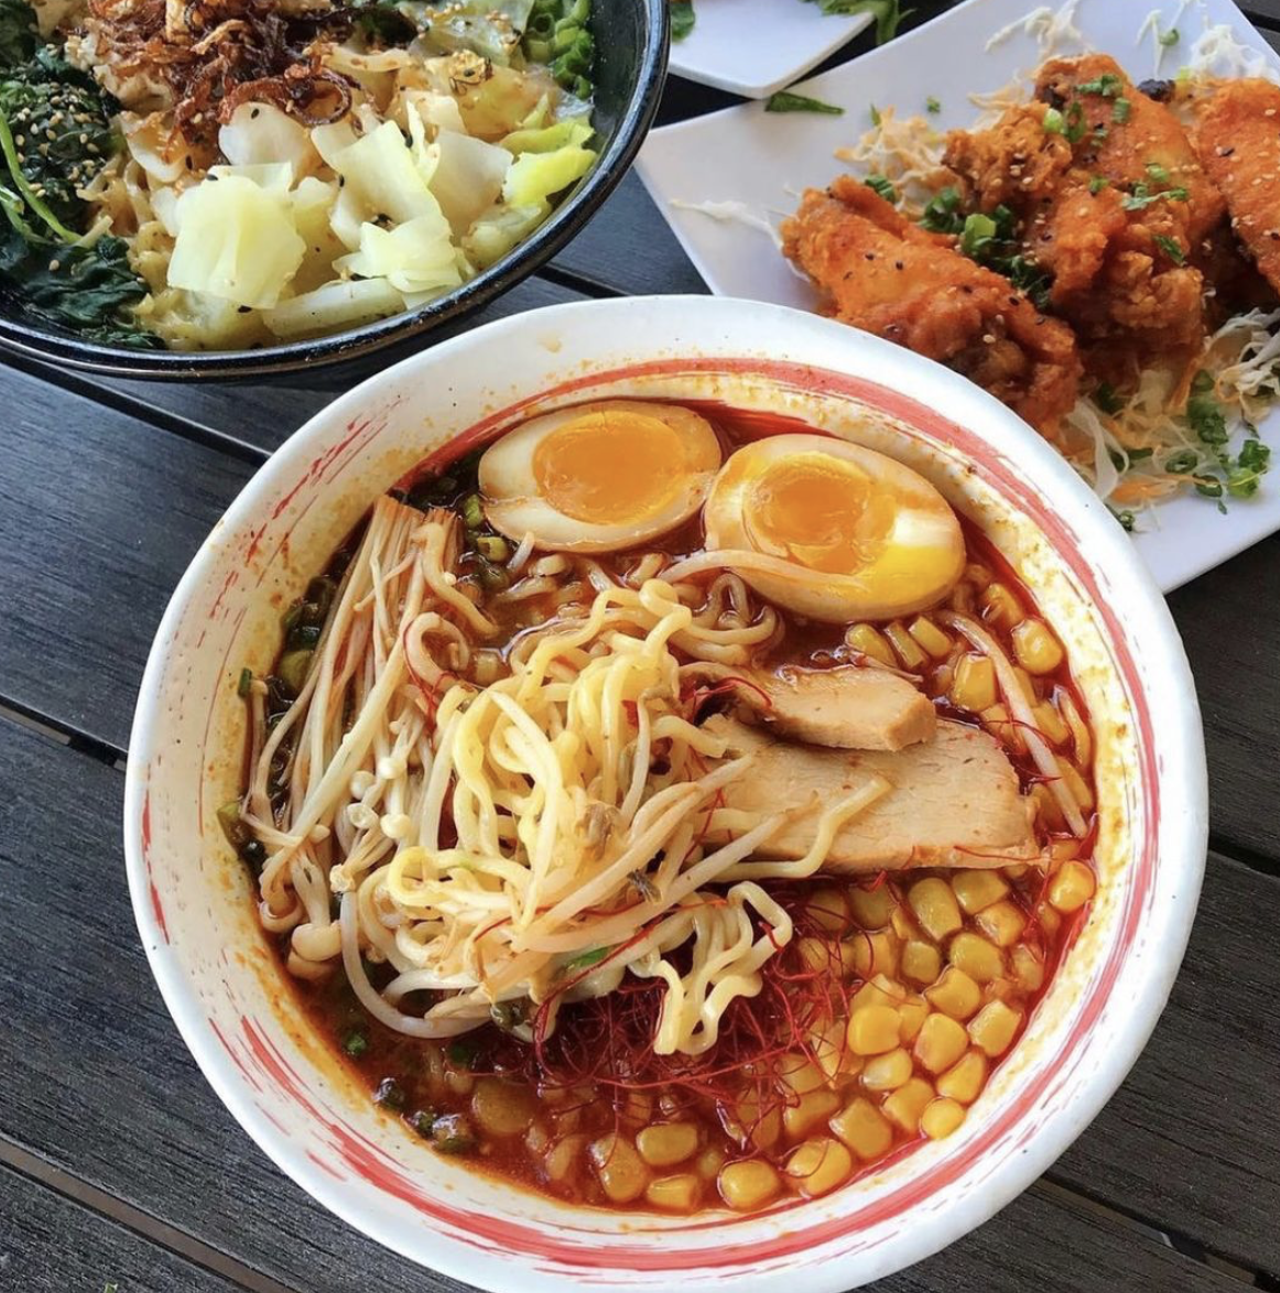 Bakudan Ramen
17619 La Cantera Pkwy #208, (210) 257-8080, bakudanramen.com
Is there a more perfect marriage out there for SA noodle lovers than pozole and ramen? We think not. Try it at Bakudan.  
Photo via Instagram / 
bakudanramen